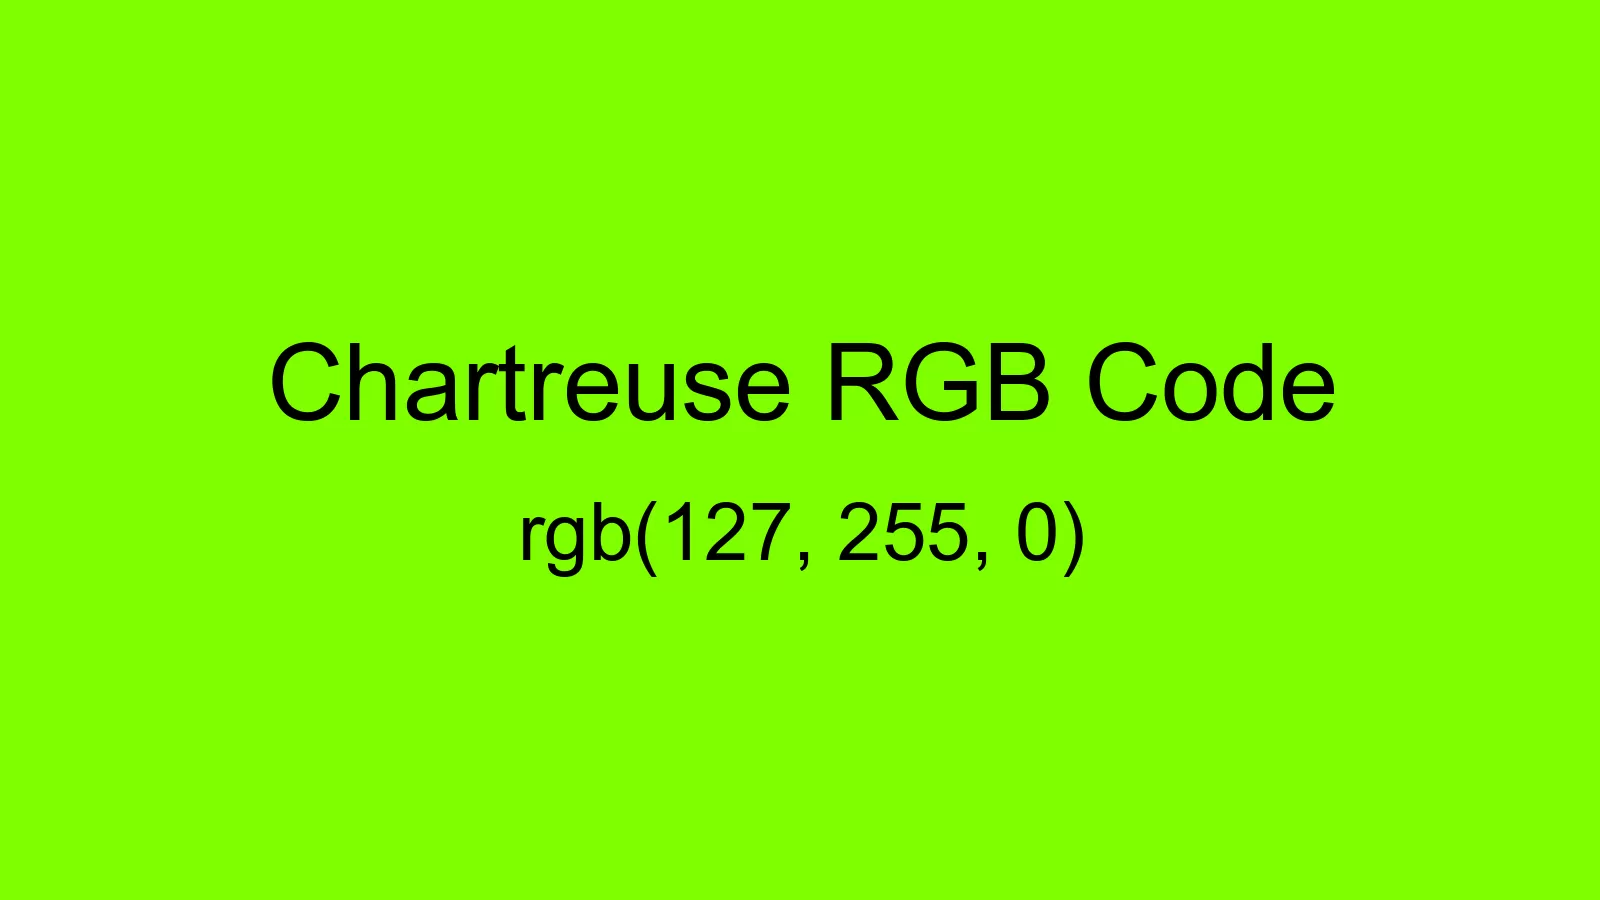 preview image of Chartreuse color and RGB code